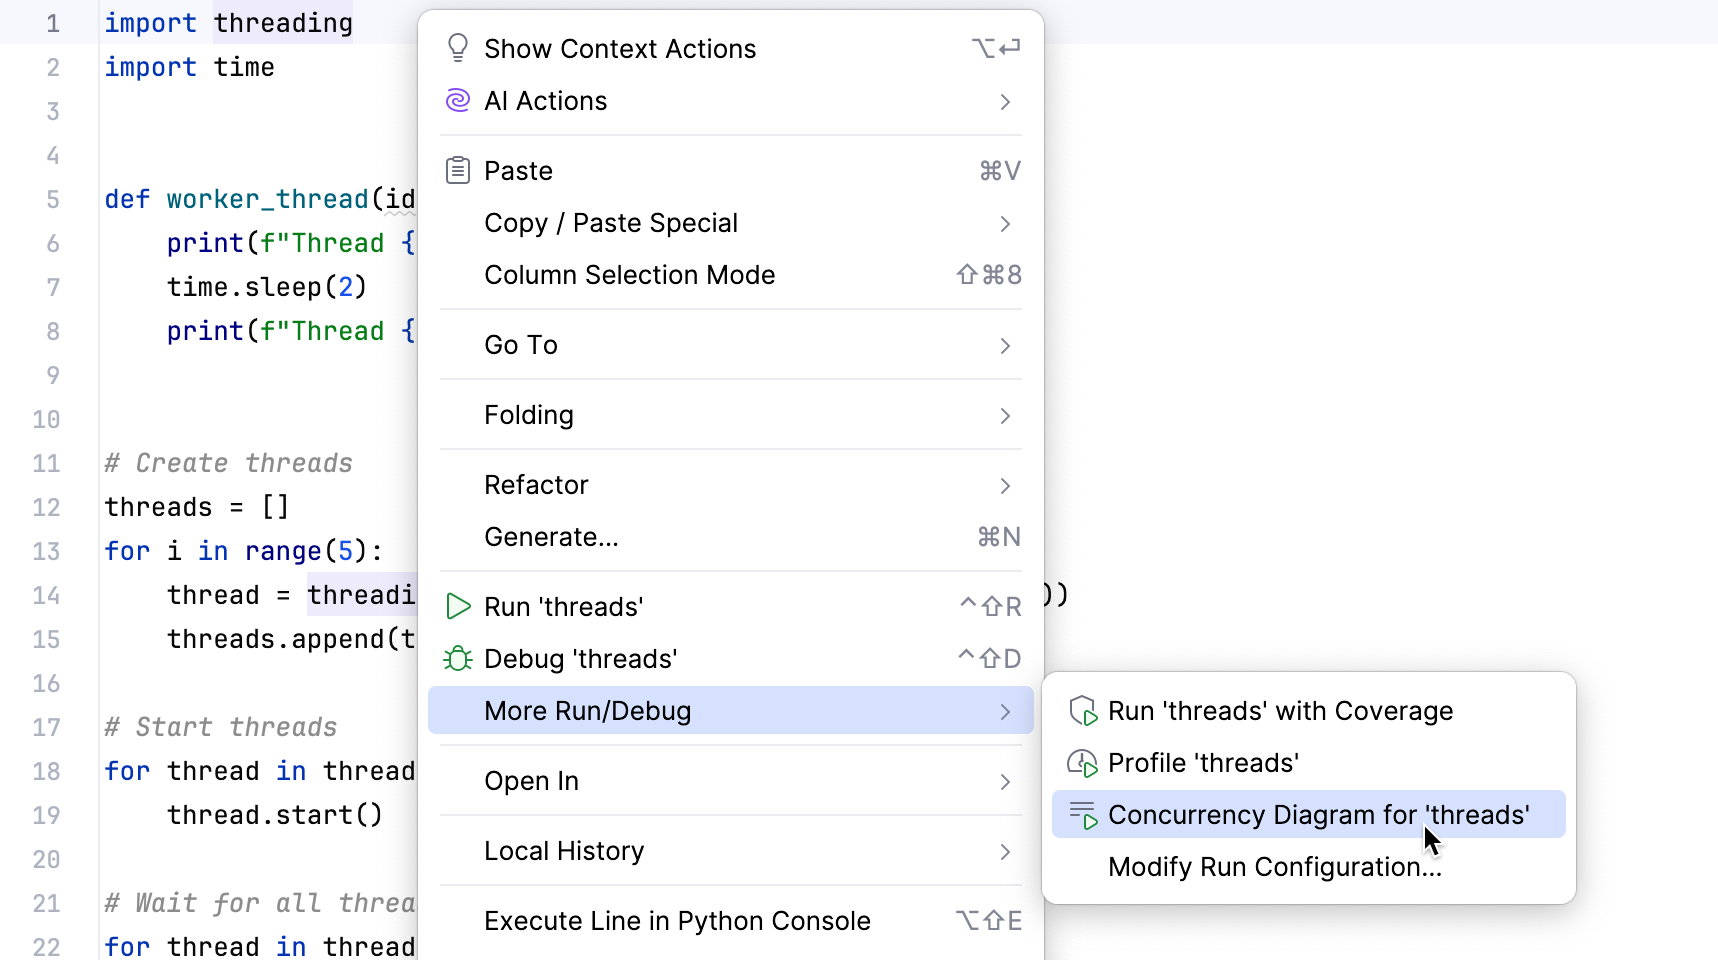 Run Concurrency Diagram from the context menu